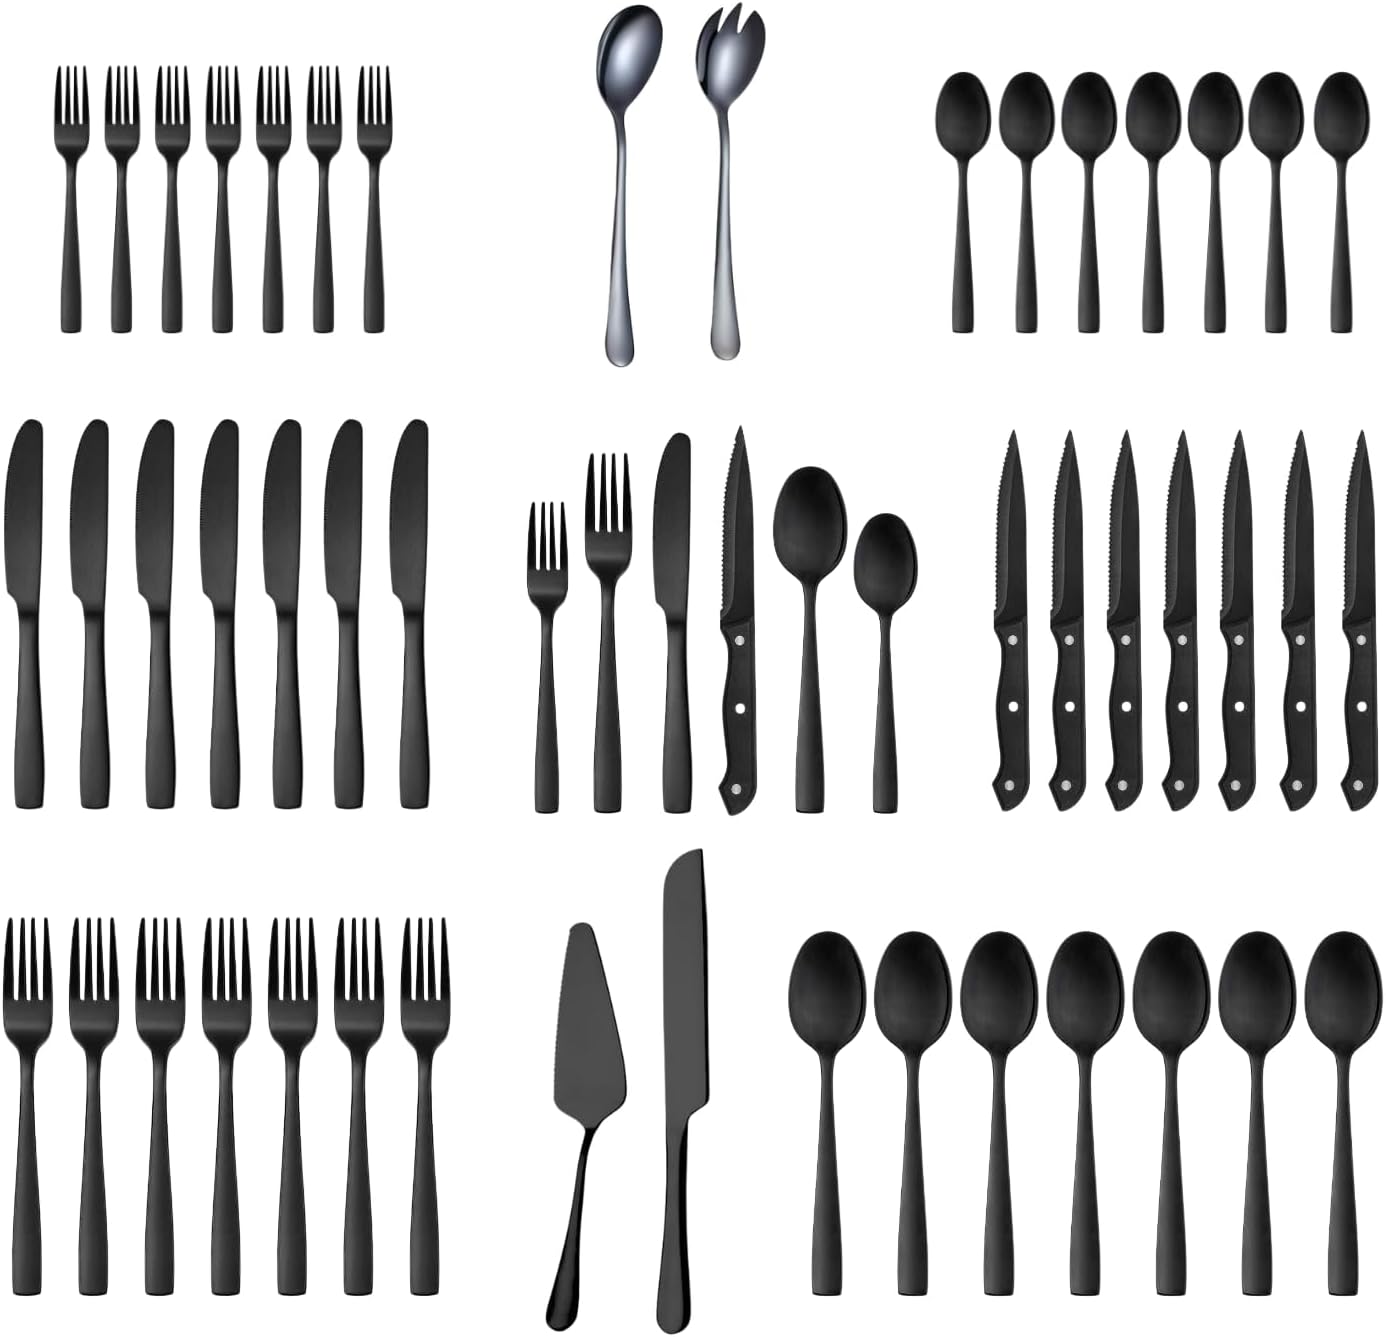 Lala Home Black Silverware Set, 52 Pieces Stainless Steel Flatware Set, Shiny Finish Tableware Cutlery Set, Service for 8 with Steak Knife and Kitchen Utensils, Dishwasher Safe.